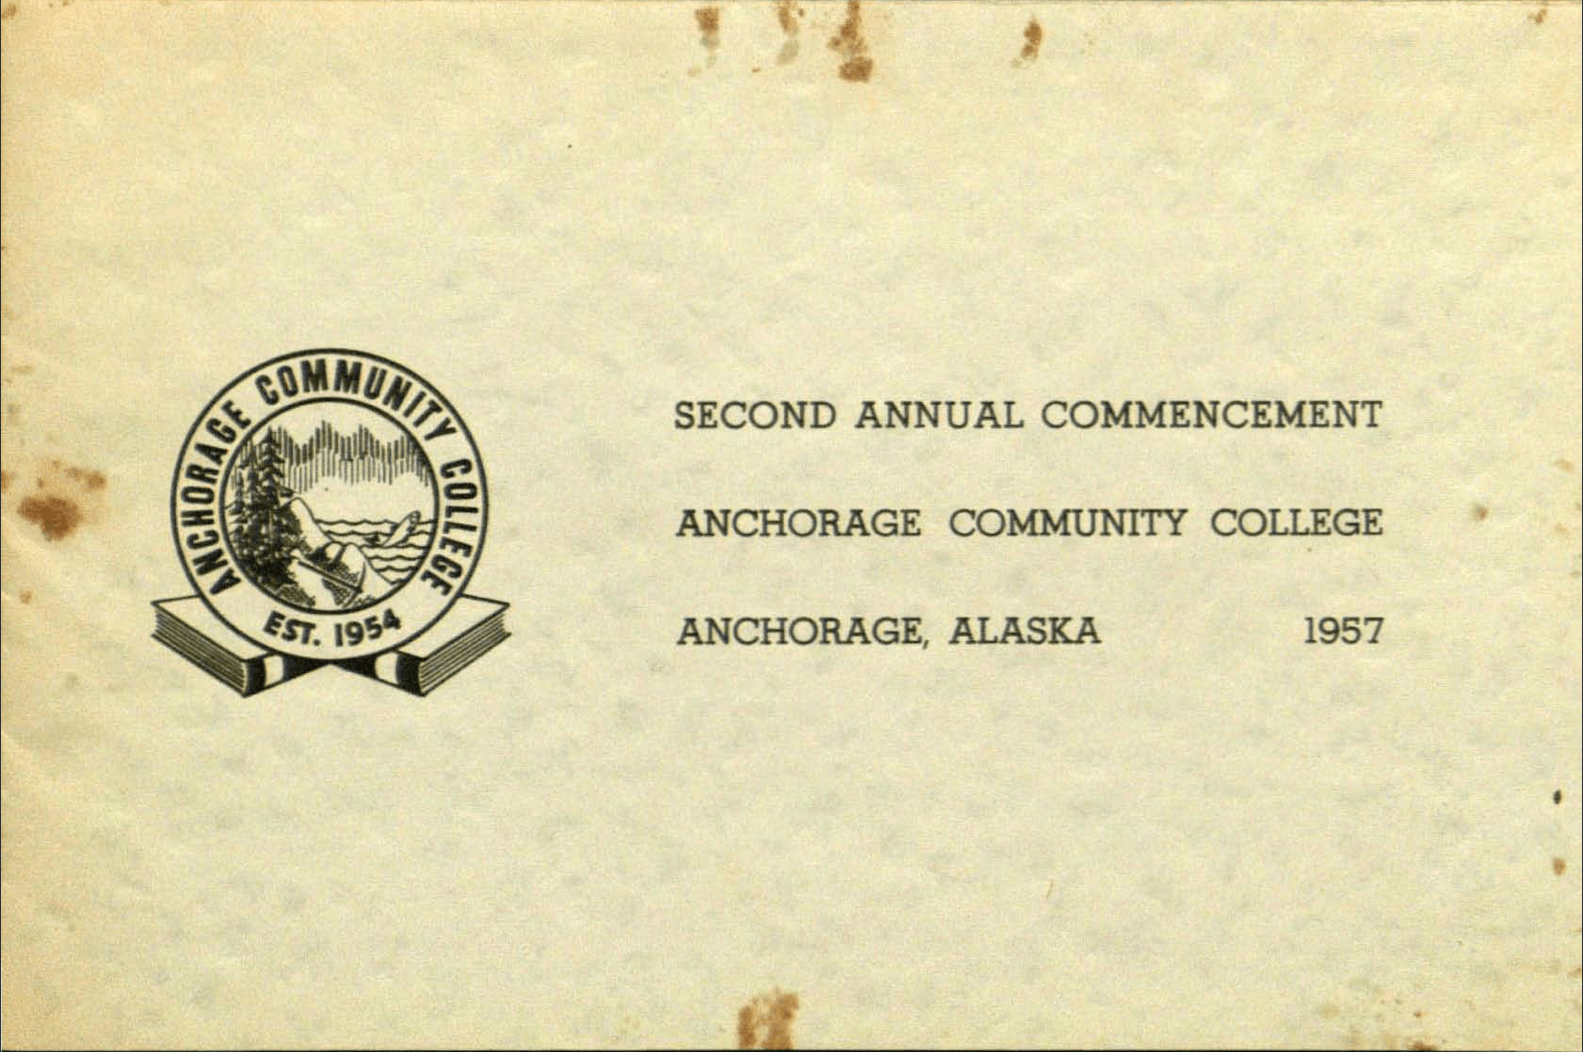 The program for commencement in 1957, when the graduating class included only four students. Image courtesy of UAA University Relations photographs, Archives and Special Collections, University of Alaska Anchorage.